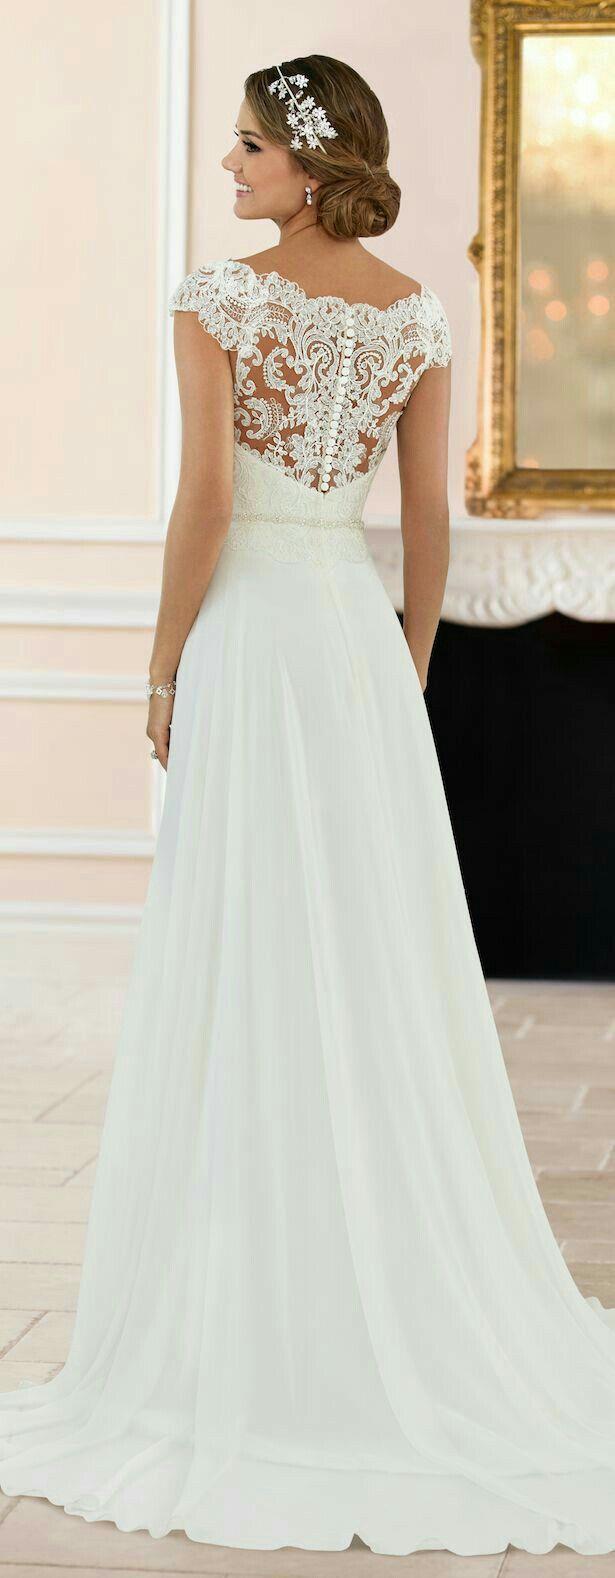 Wedding - Possible Wedding Dresses For Me